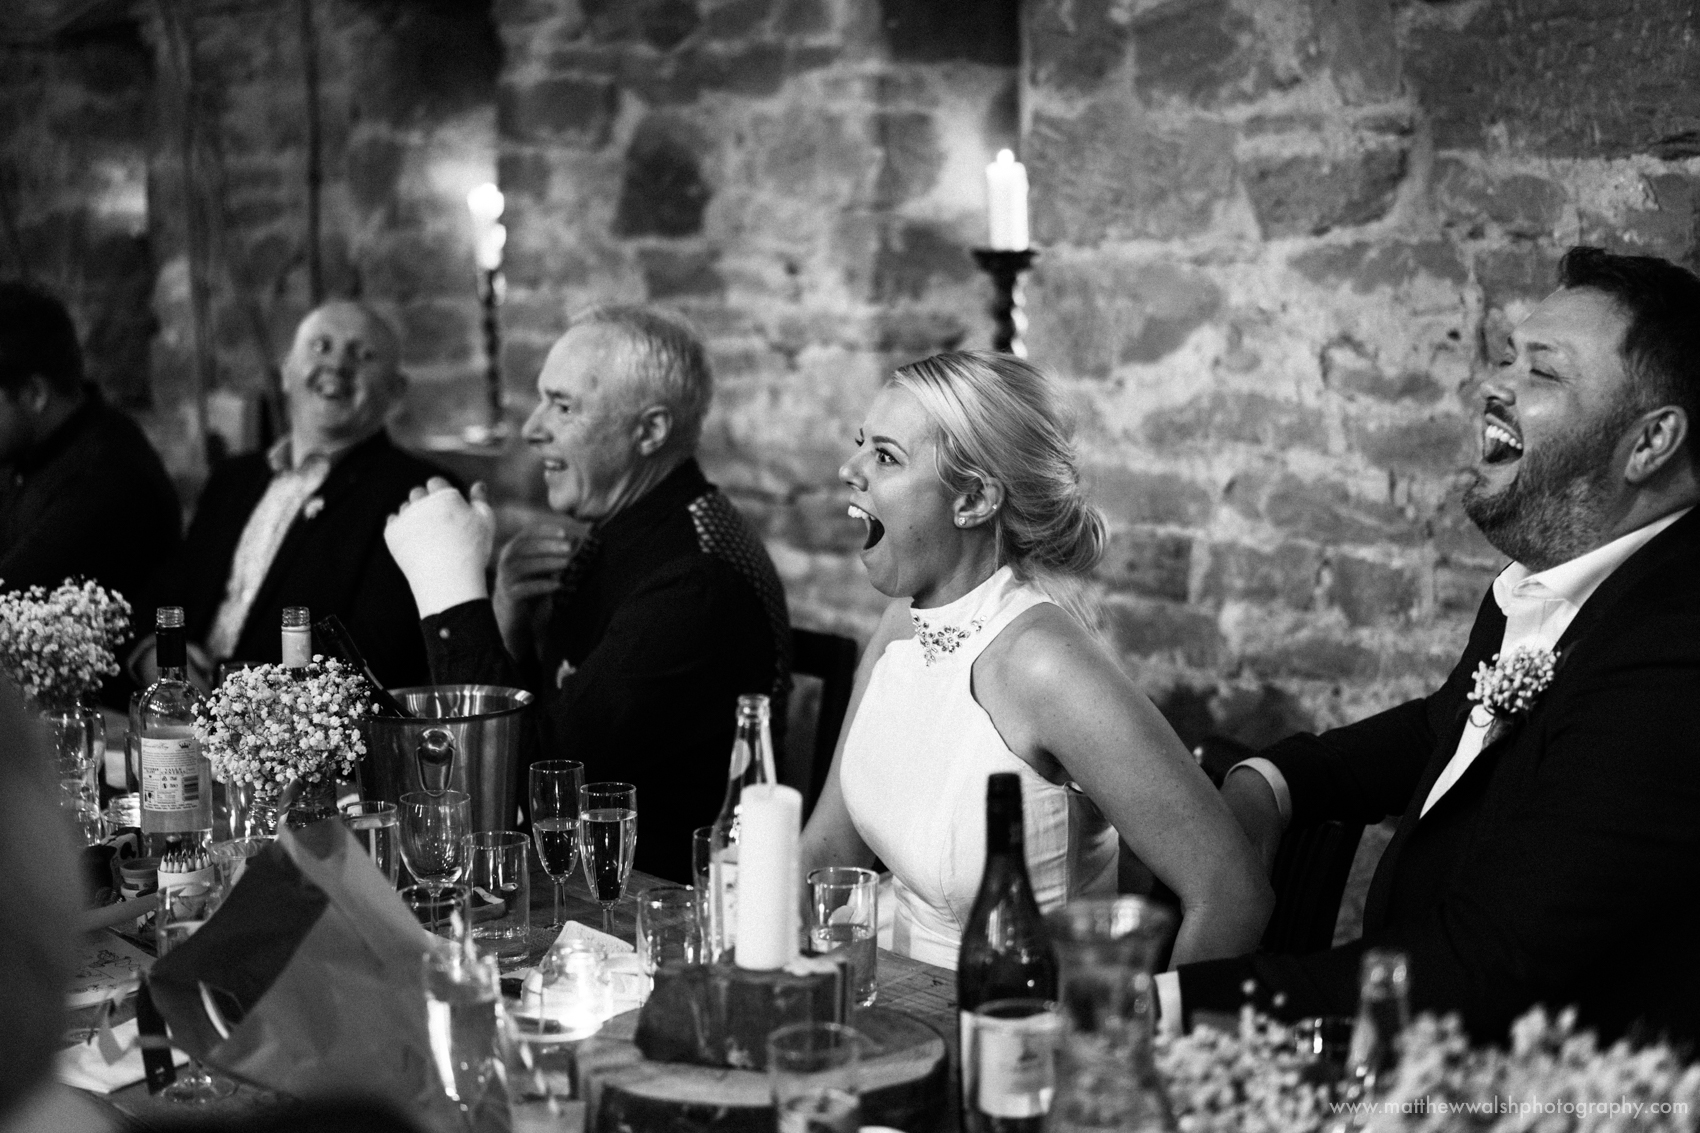 The bride and groom laughing at the poem